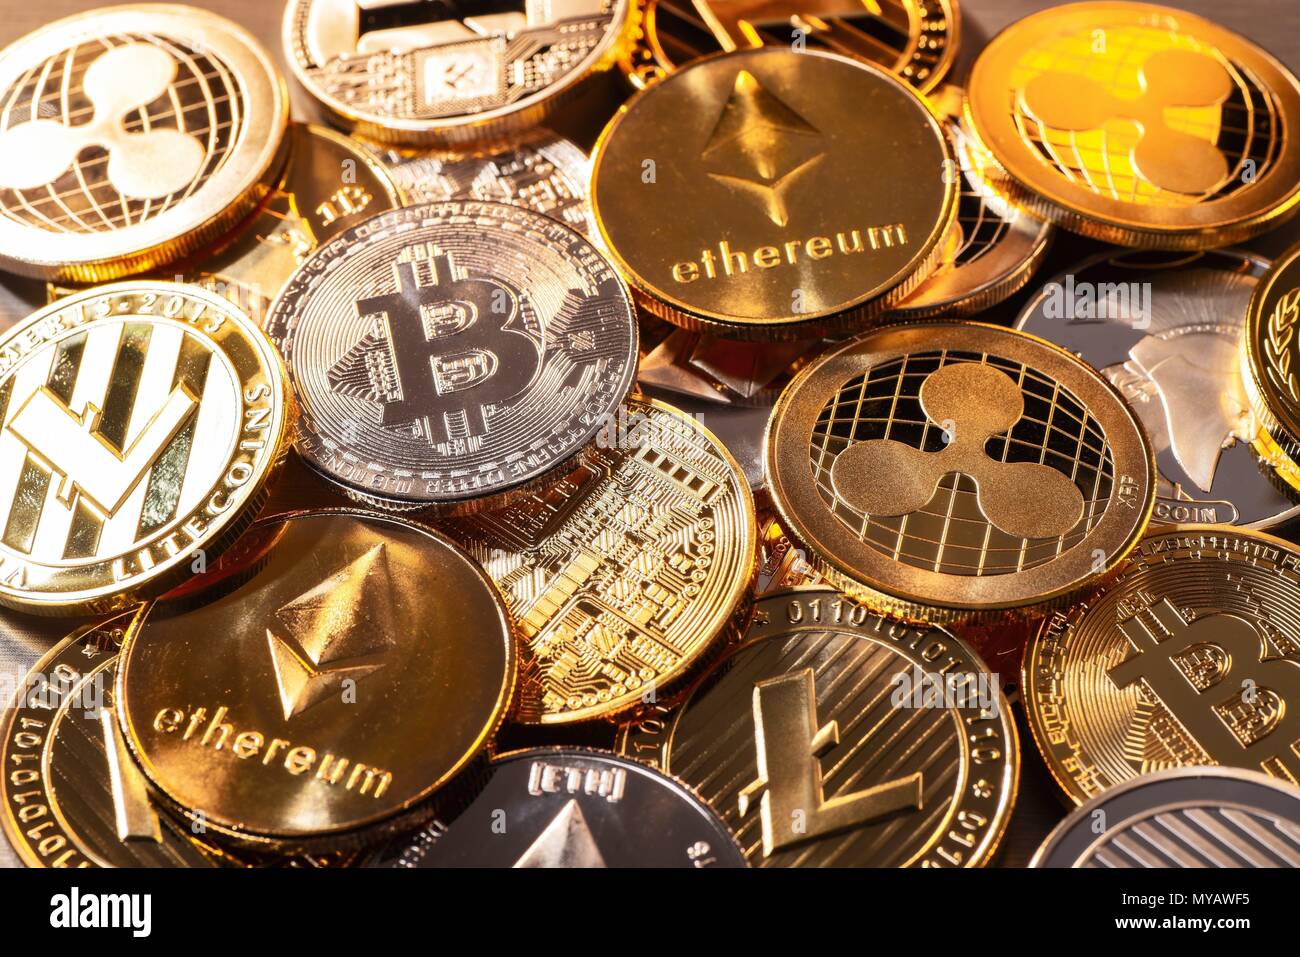 Many coins of various cryptocurrencies | usage worldwide Stock Photo